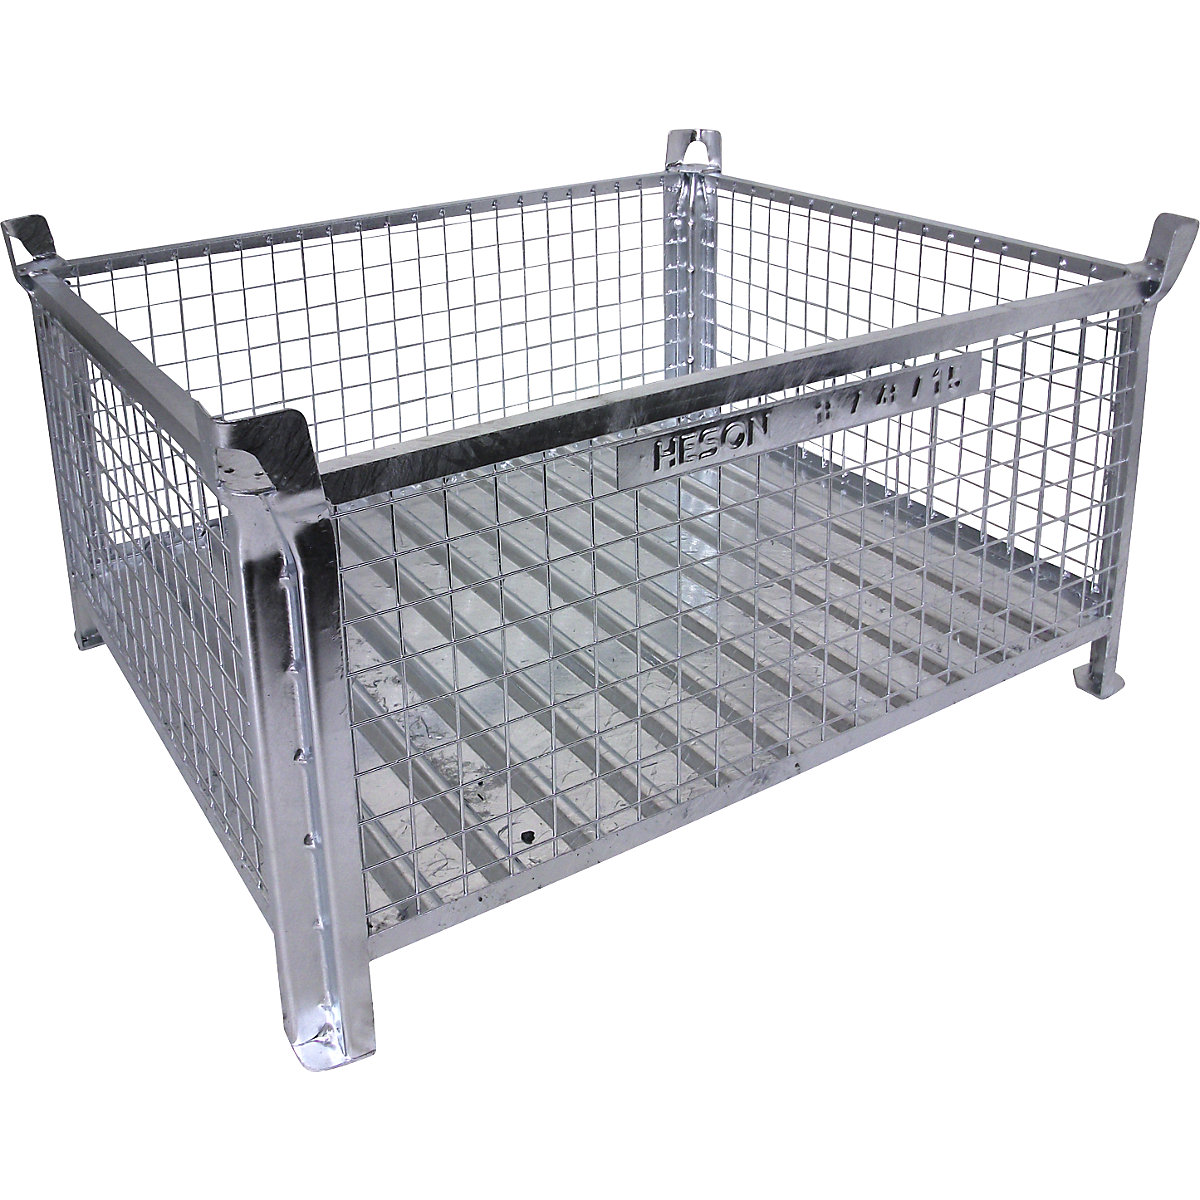 Box pallet with sheet steel base – Heson, LxW 1200 x 1000 mm, zinc plated, 5+ items-2